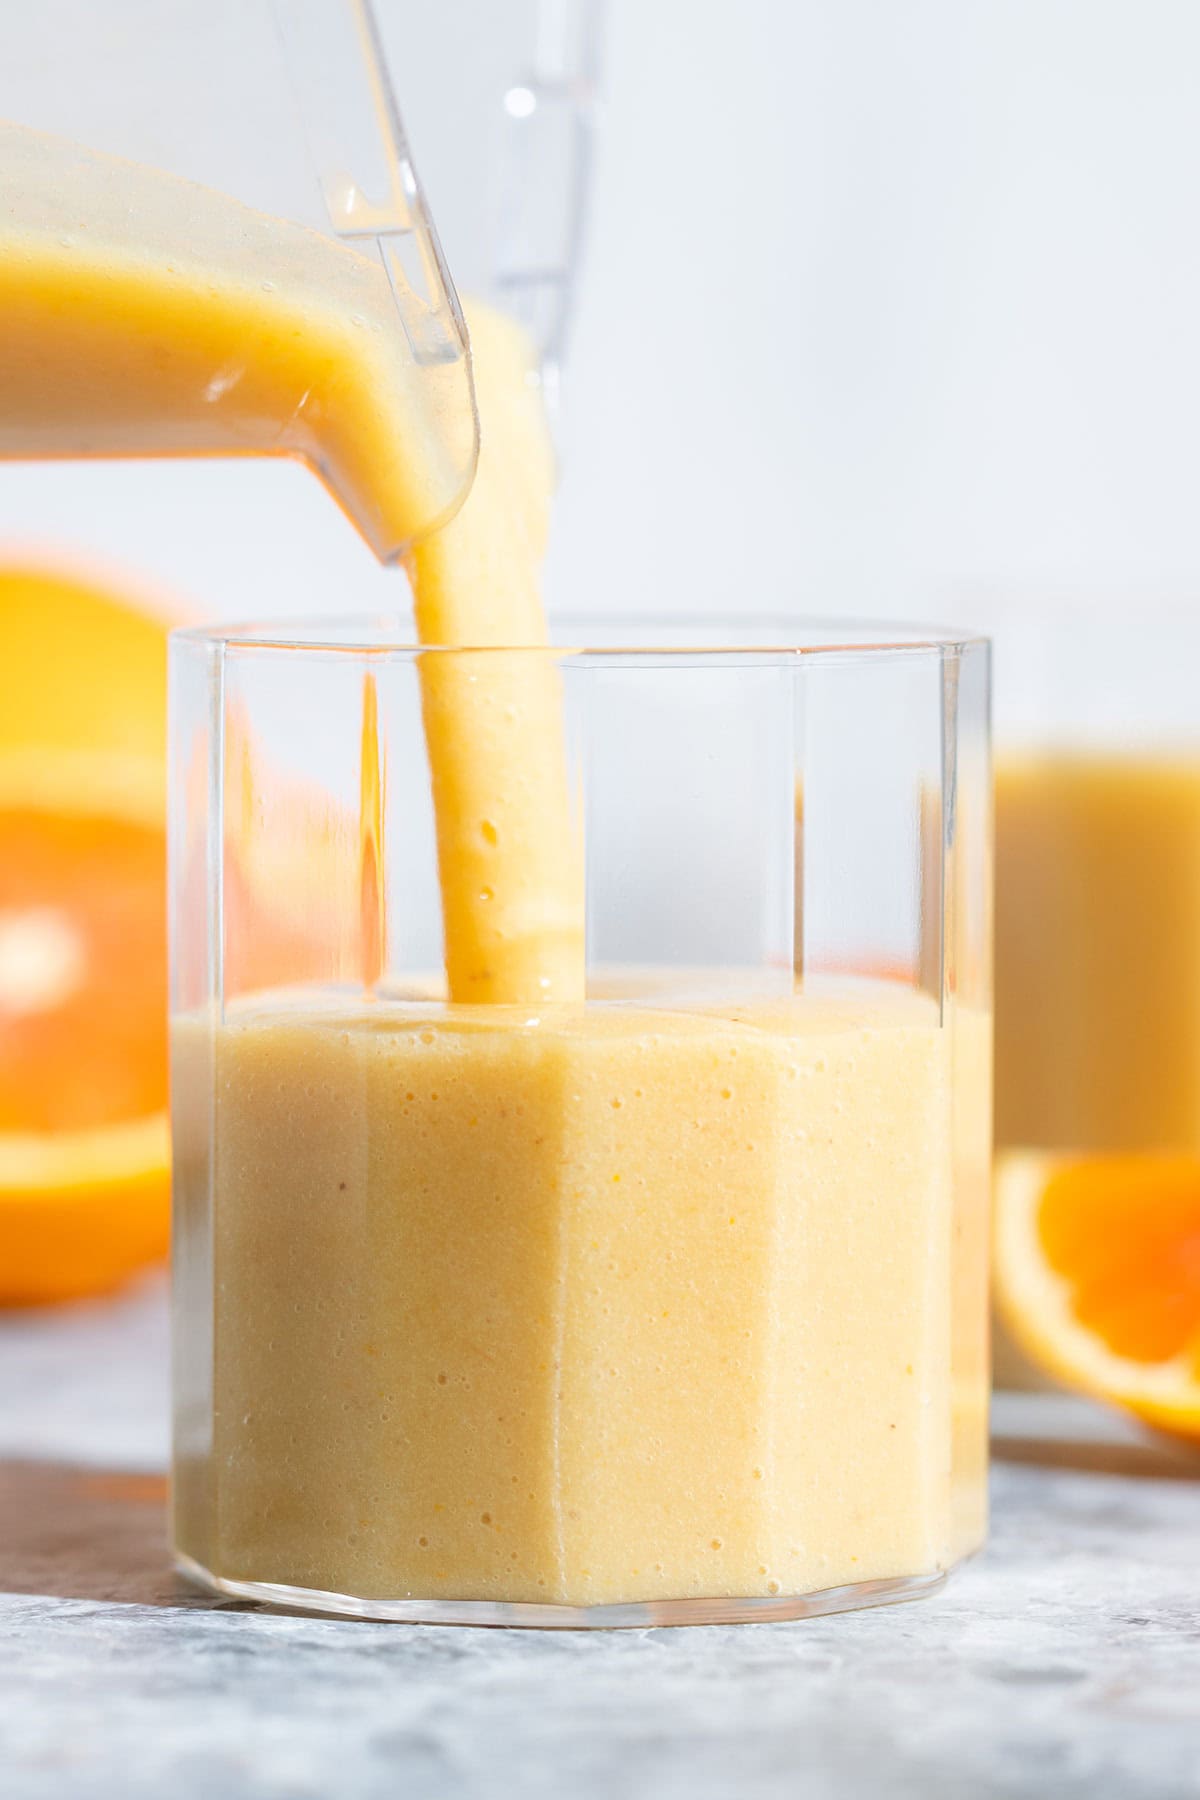 Orange smoothie being poured into a small glass.